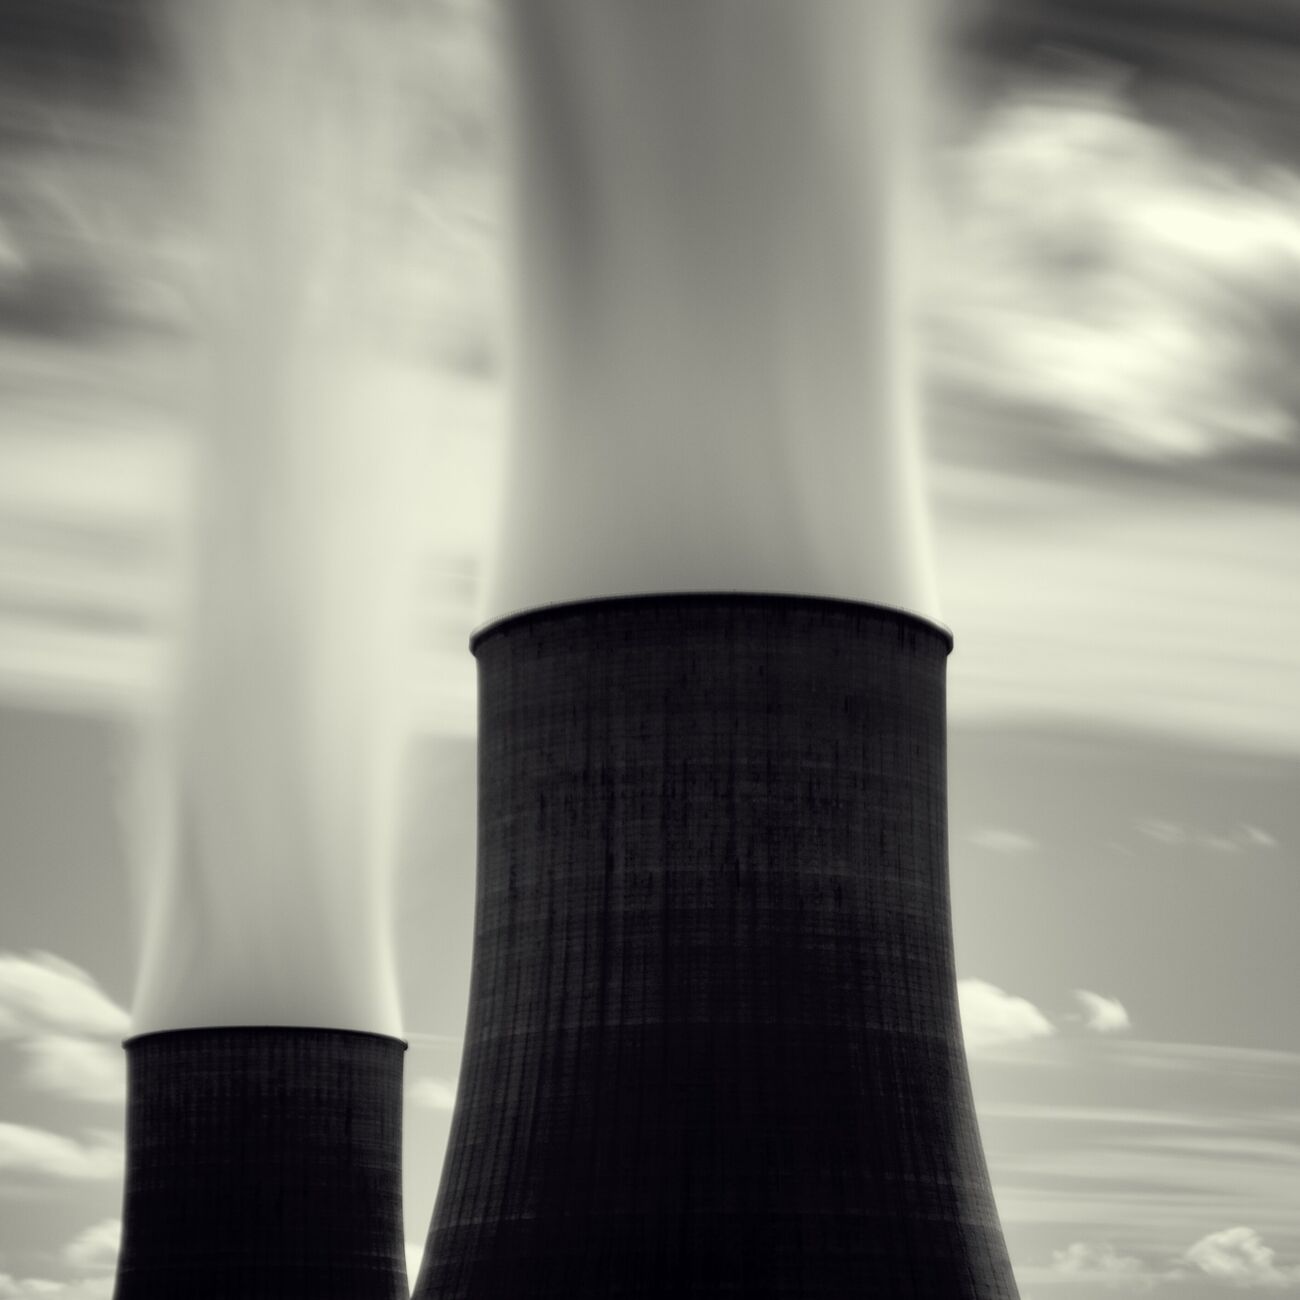 Nuclear Power Plant, Study 6, Golfech, France. August 2006. Ref-1032 - Denis Olivier Photography